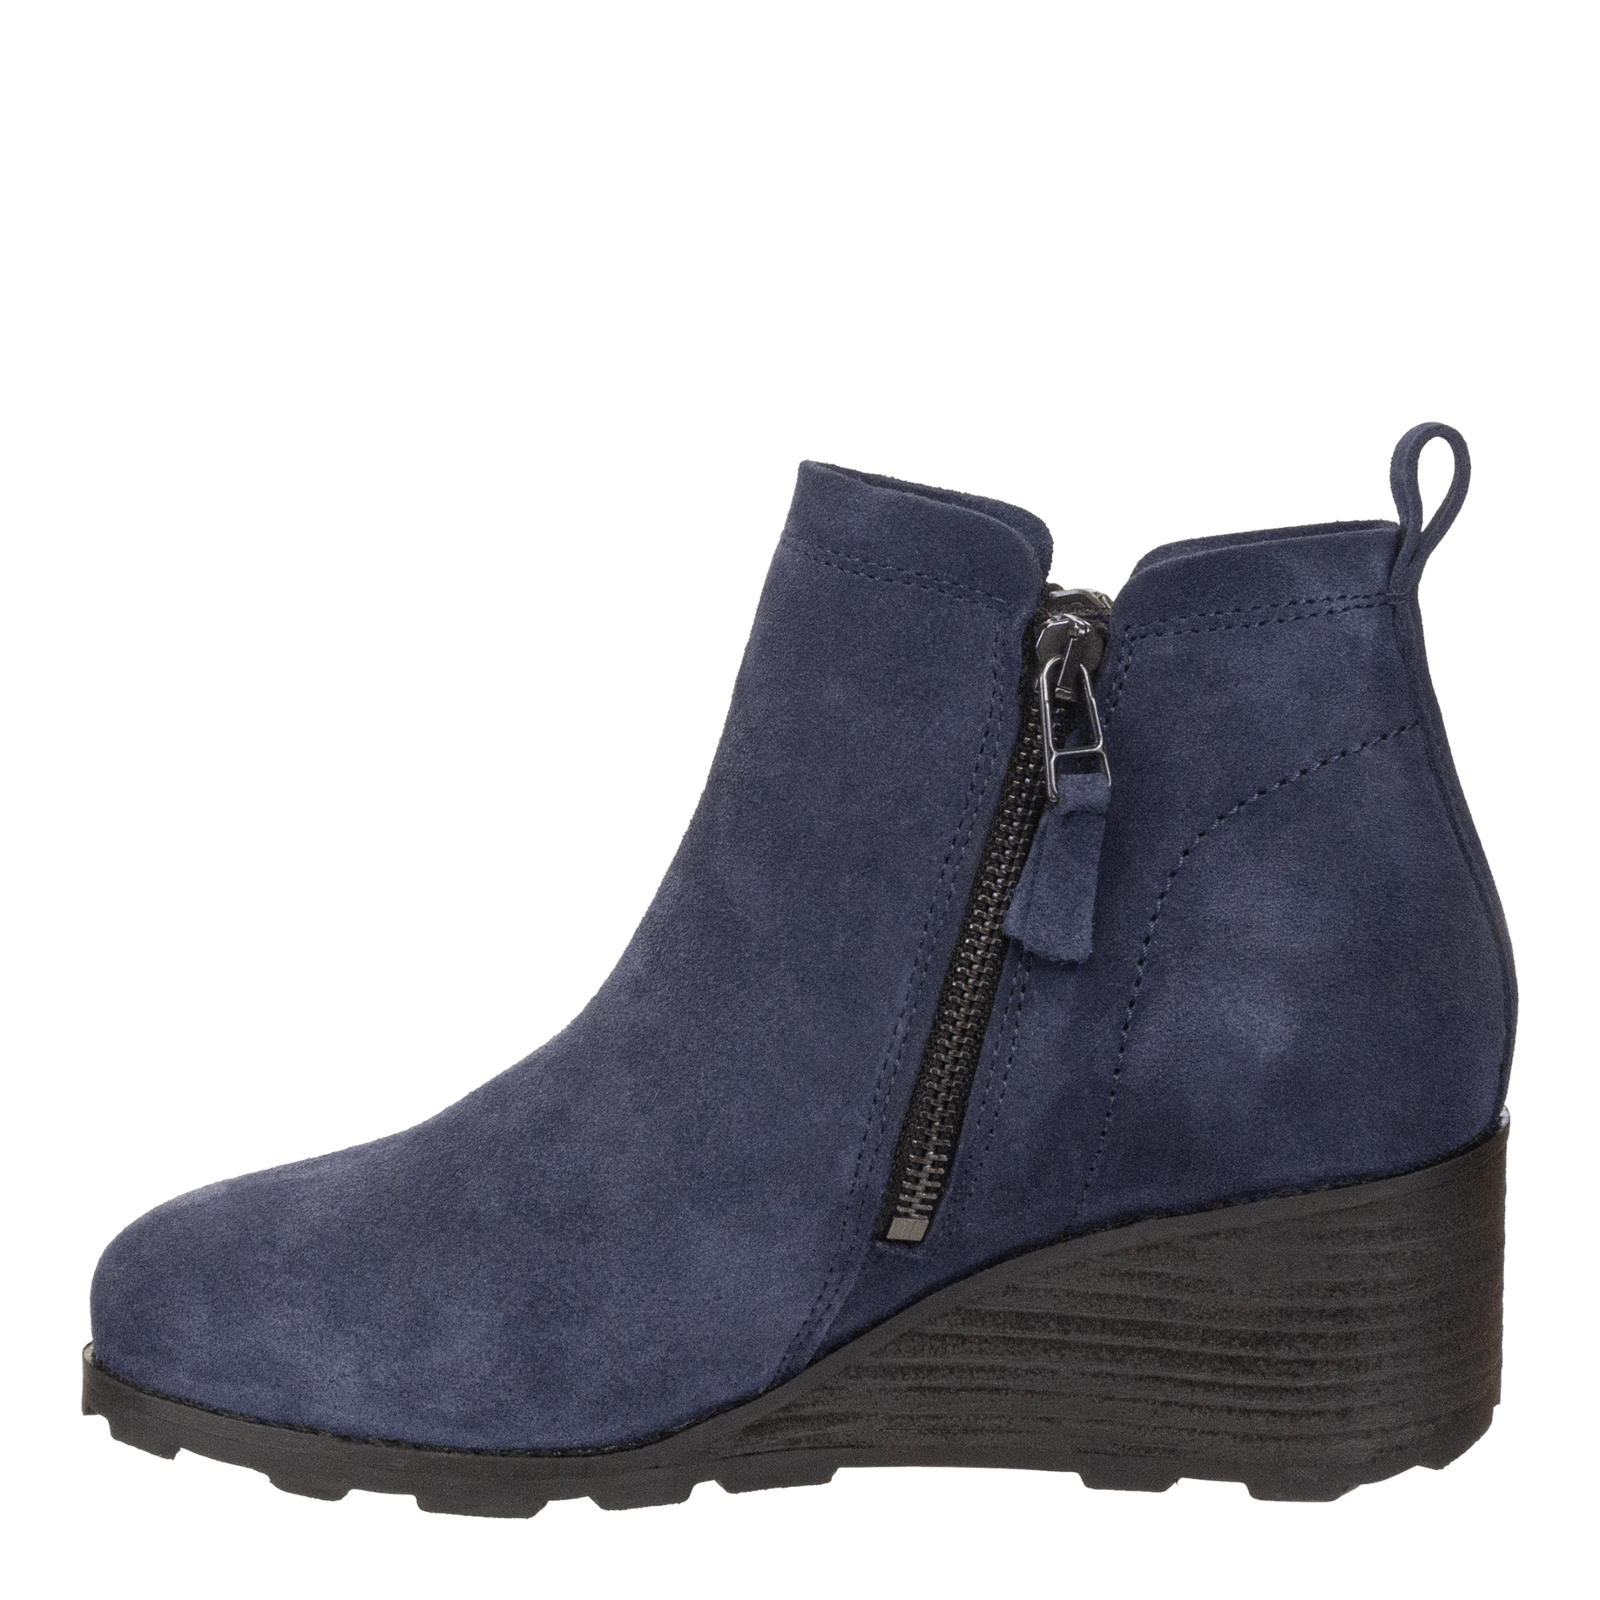 STORY in NAVY Wedge Ankle Boots